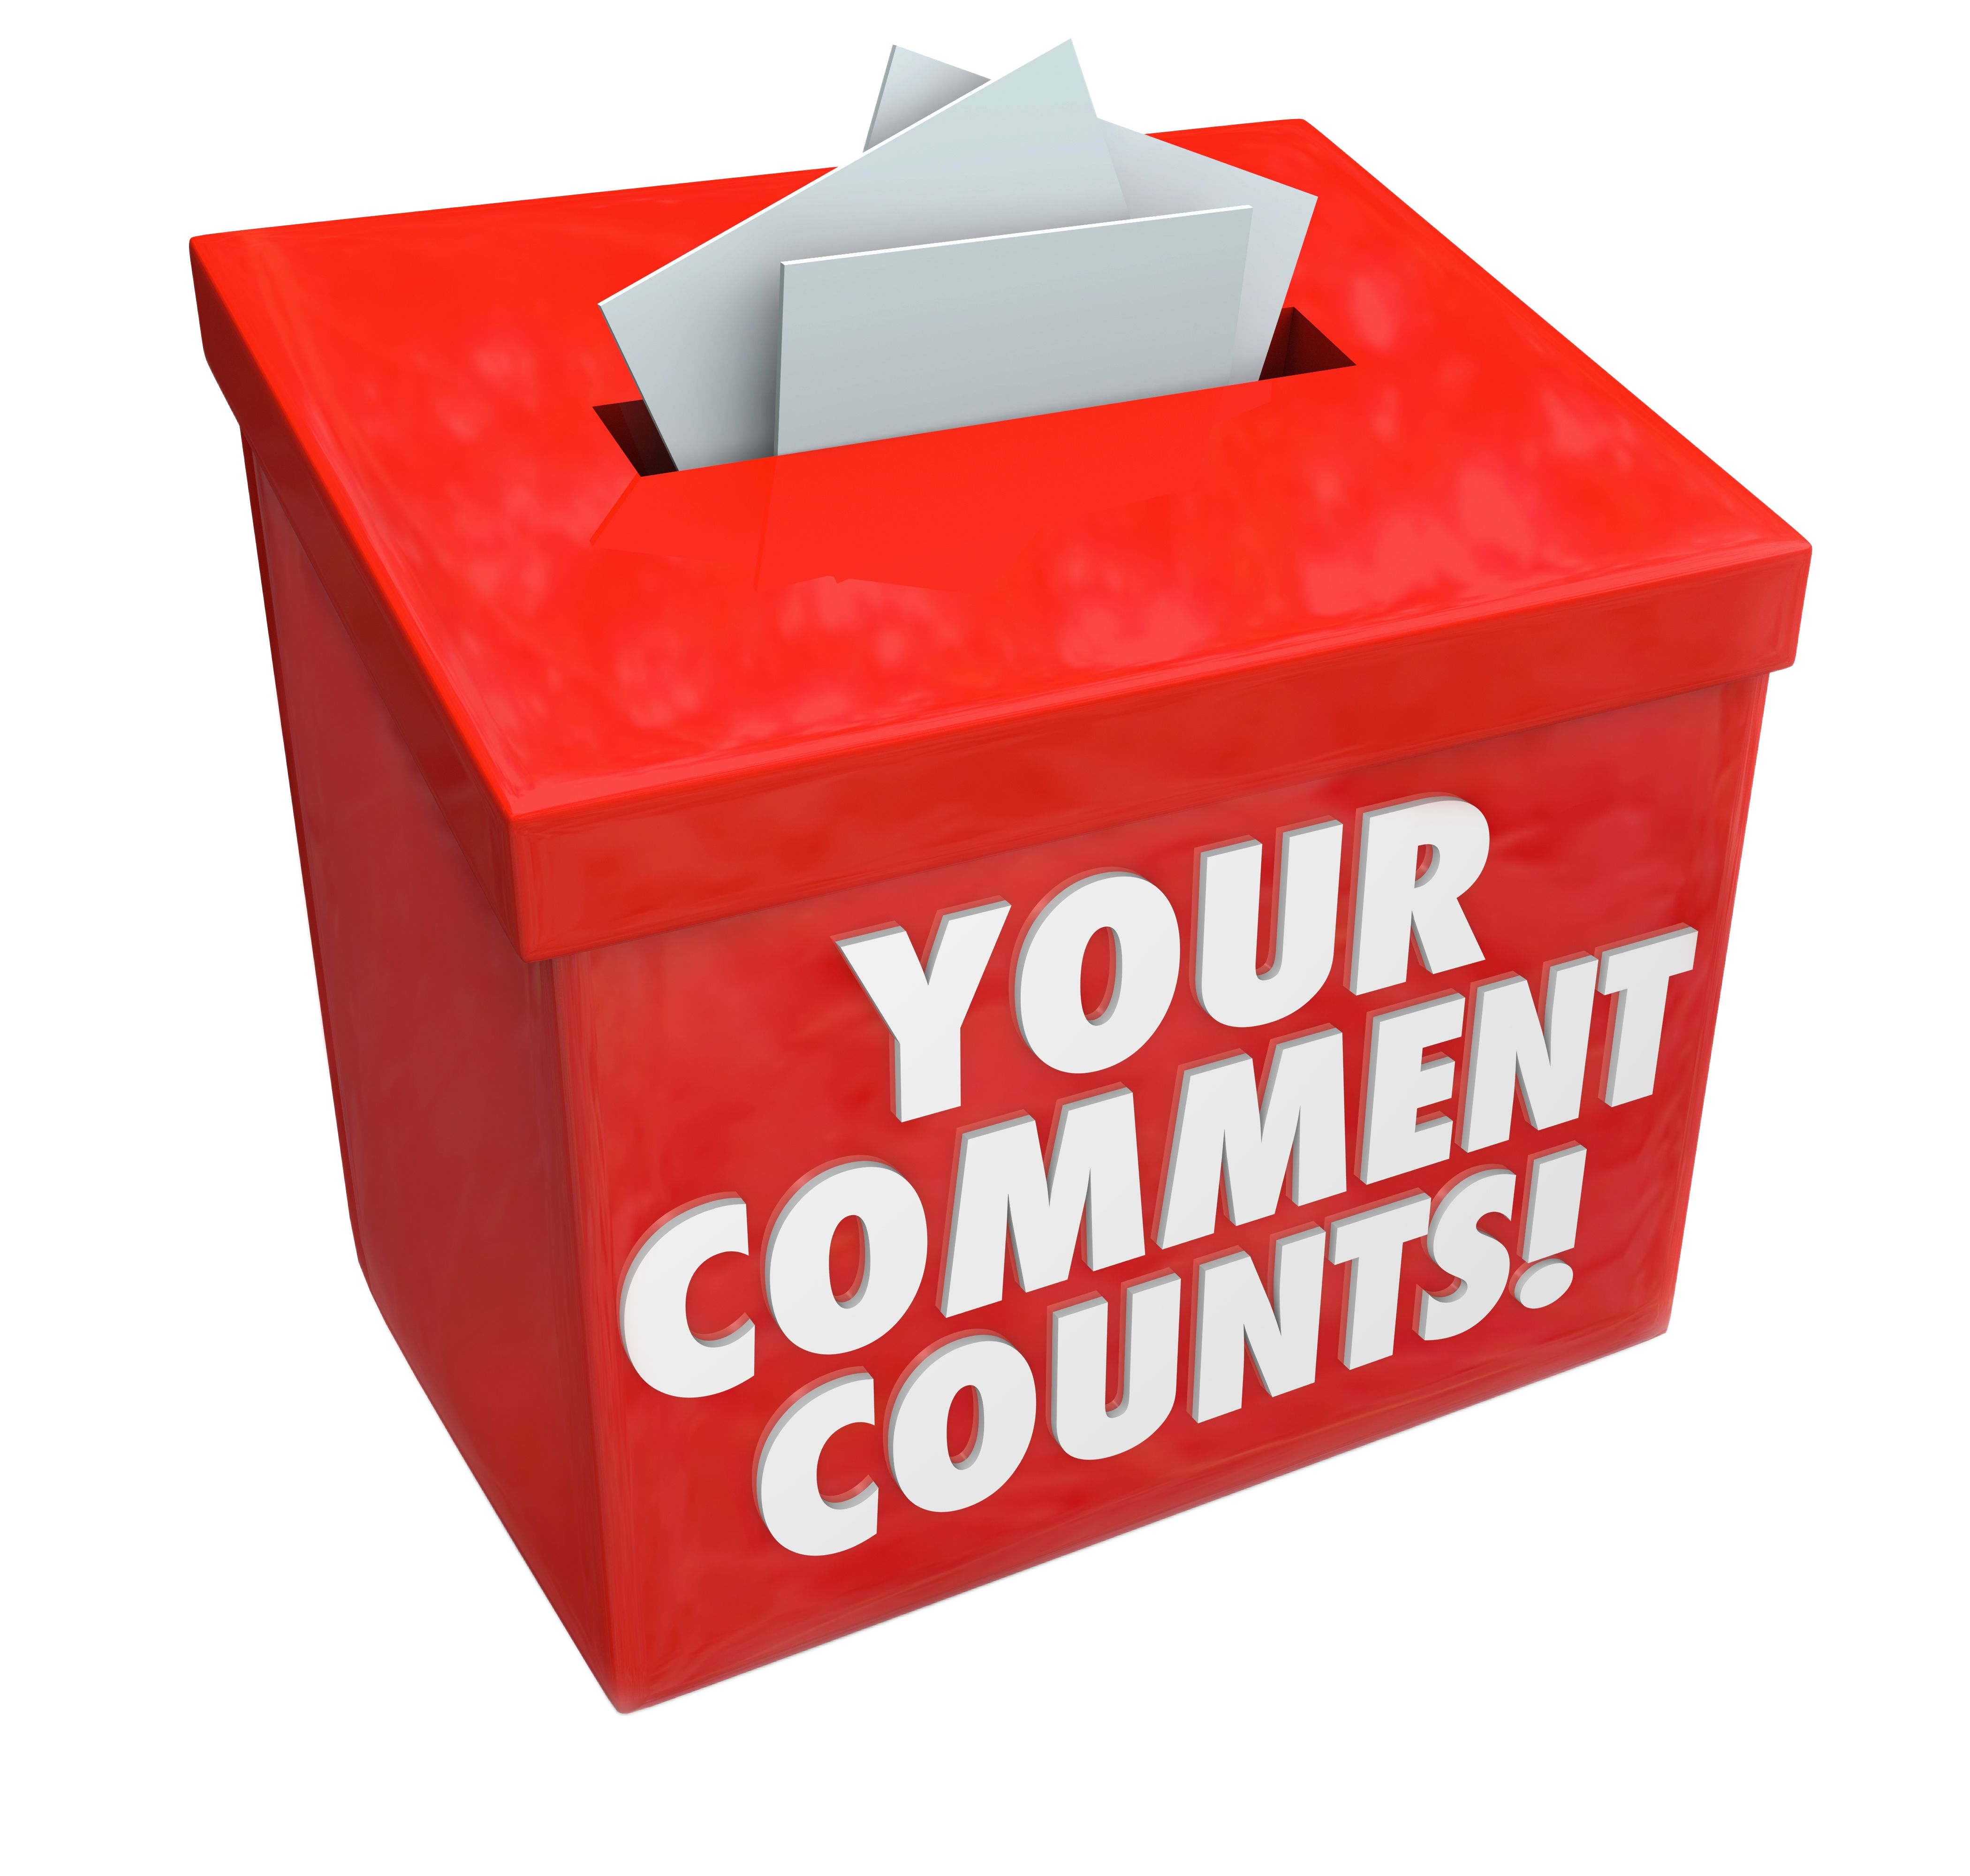 A red ballot box with 'You comment counts' written on the front of the box and the slot on the lid of the box showing some papers being dropped inside